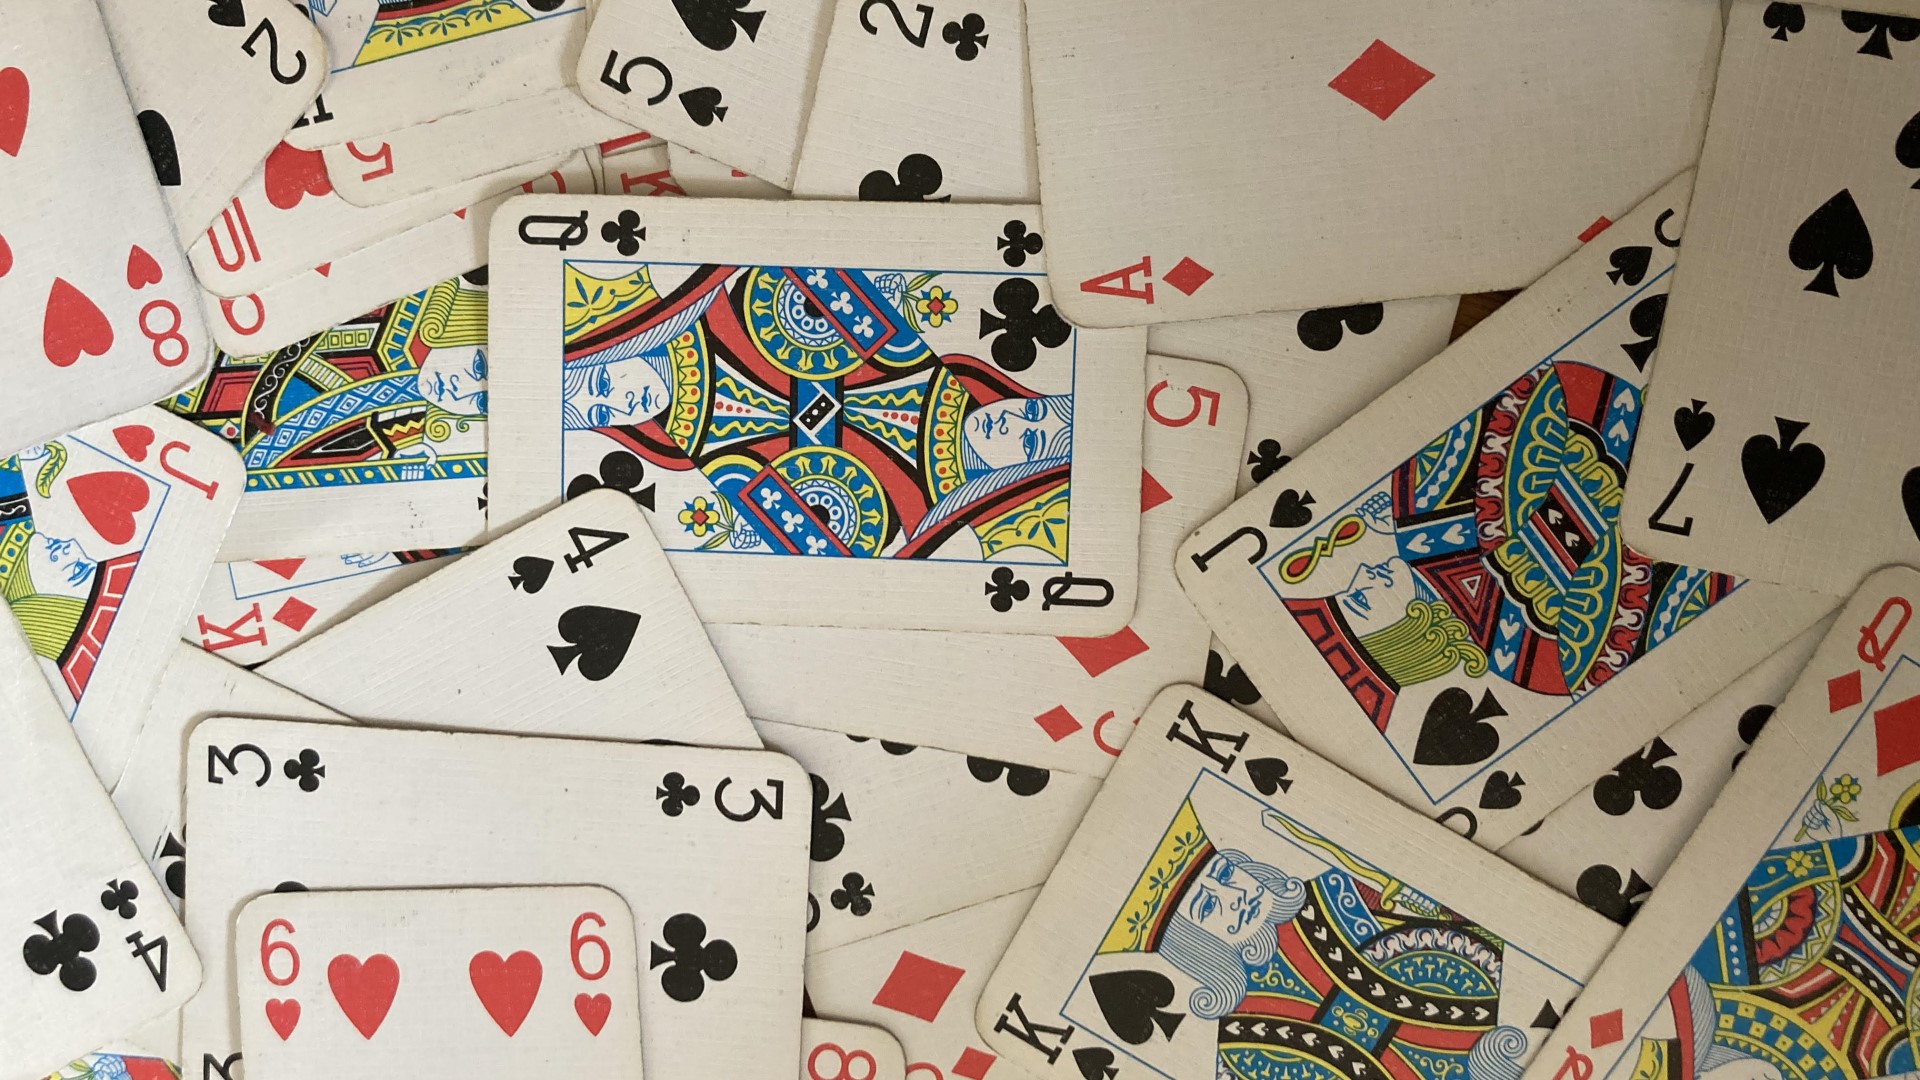 The Three Most Played Solitaire Card Games in the World